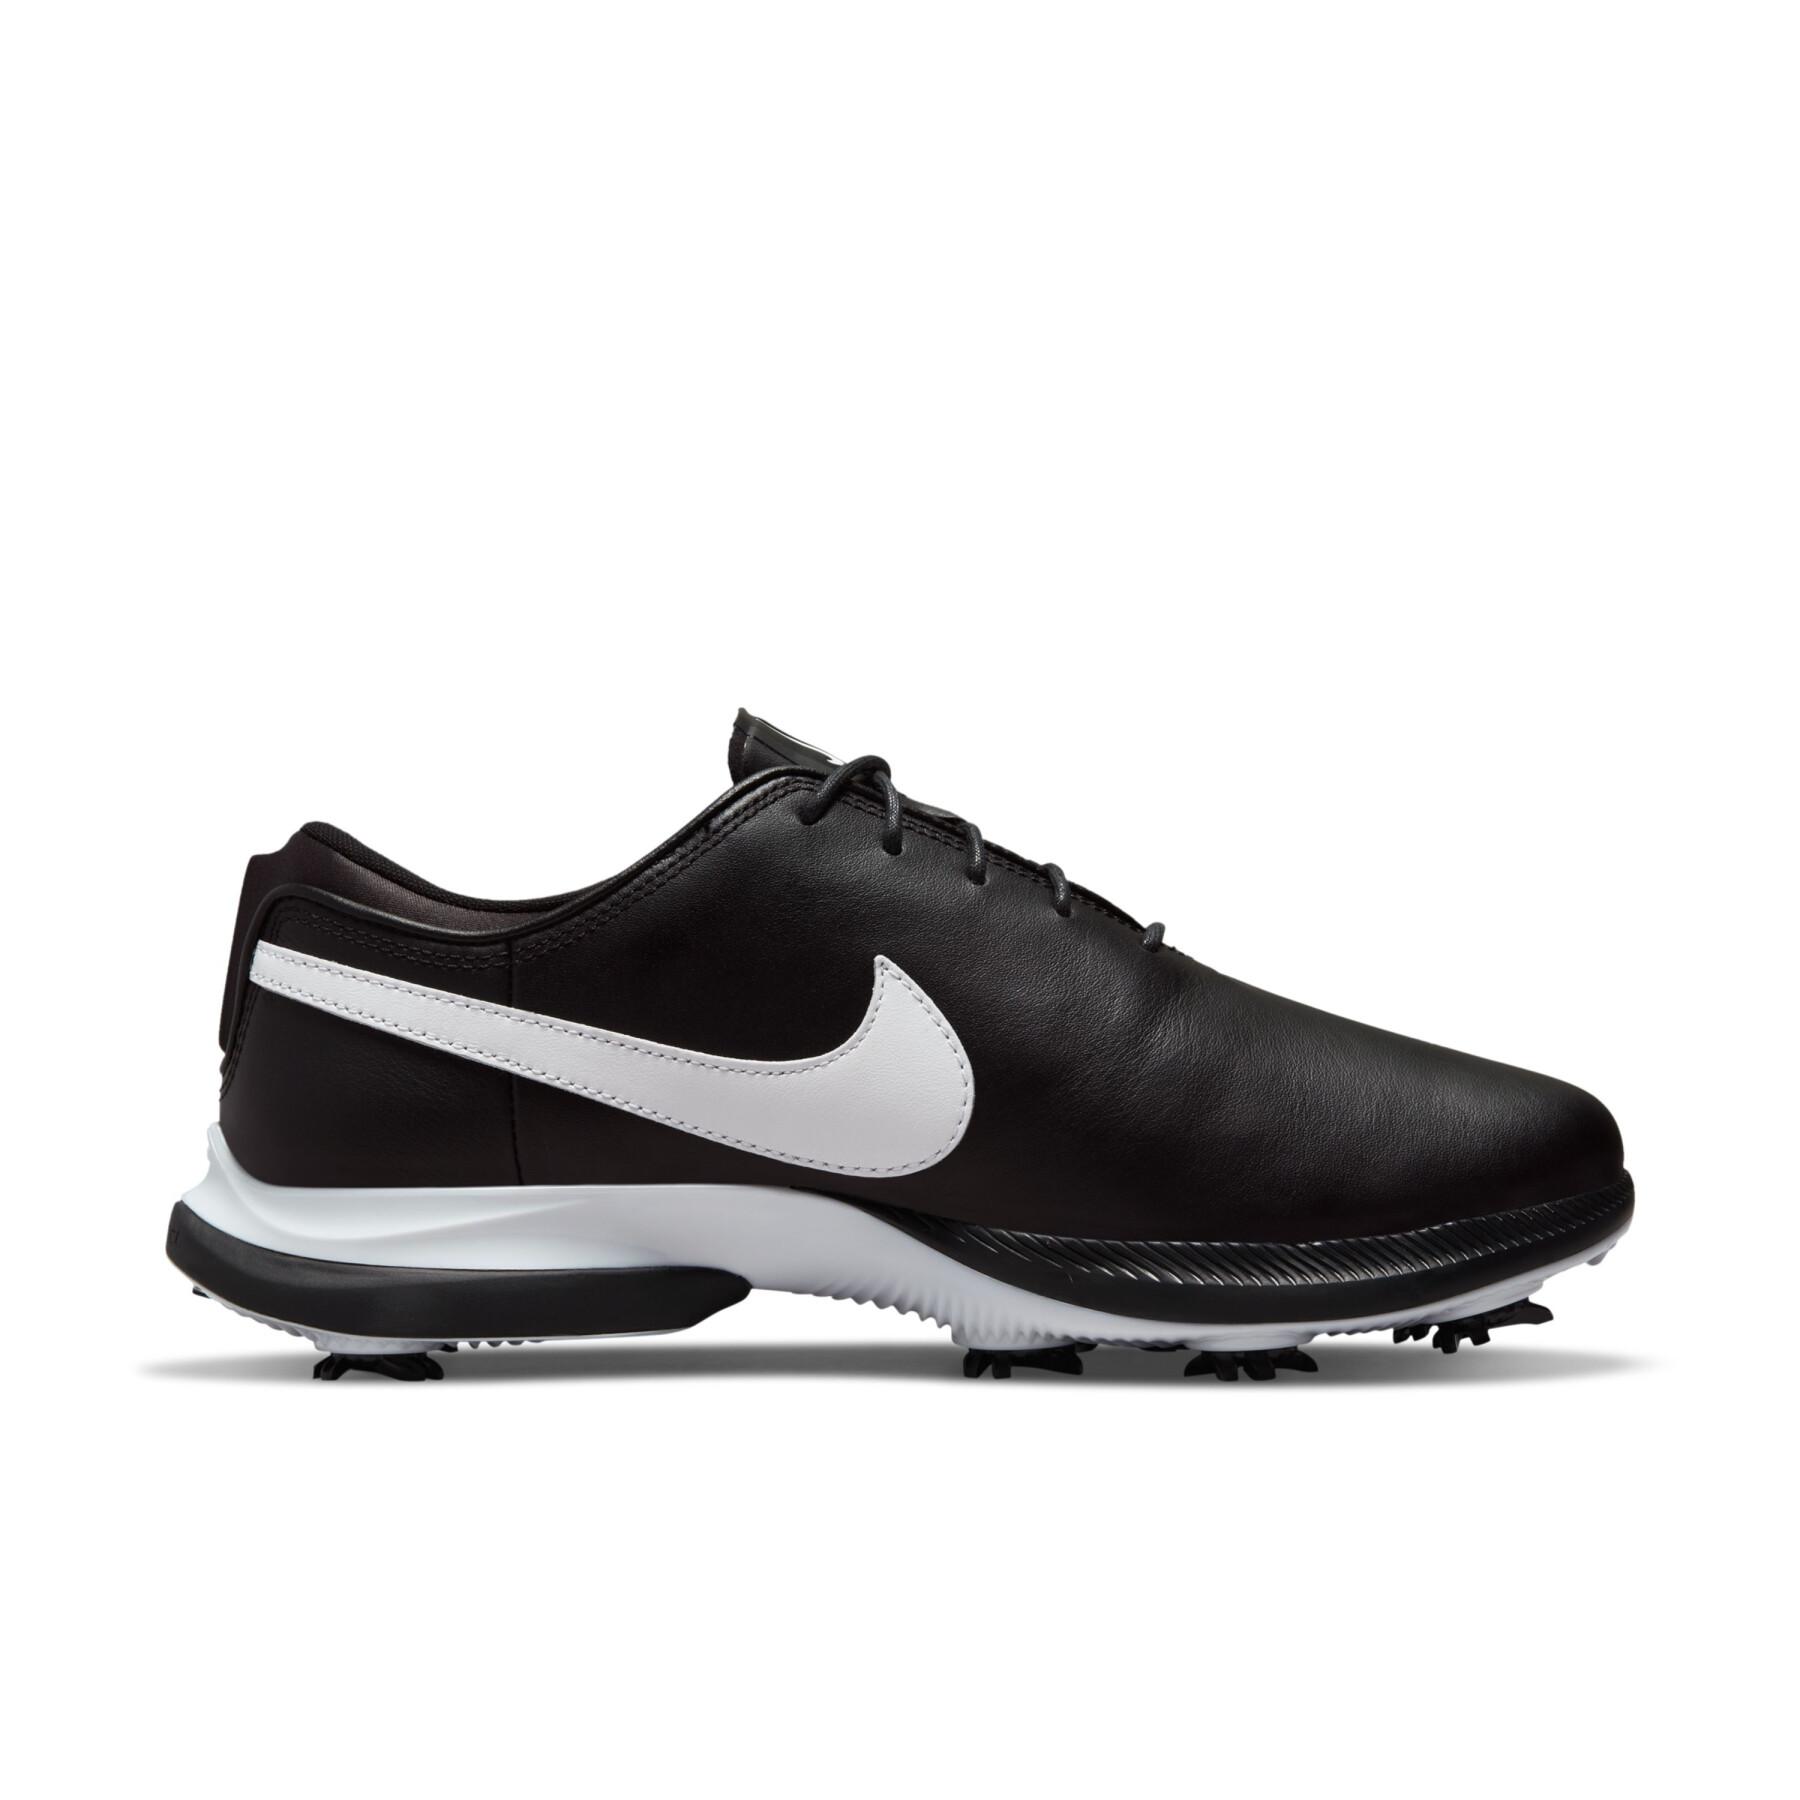 Chaussures de golf Nike Zoom Victory Tour 2